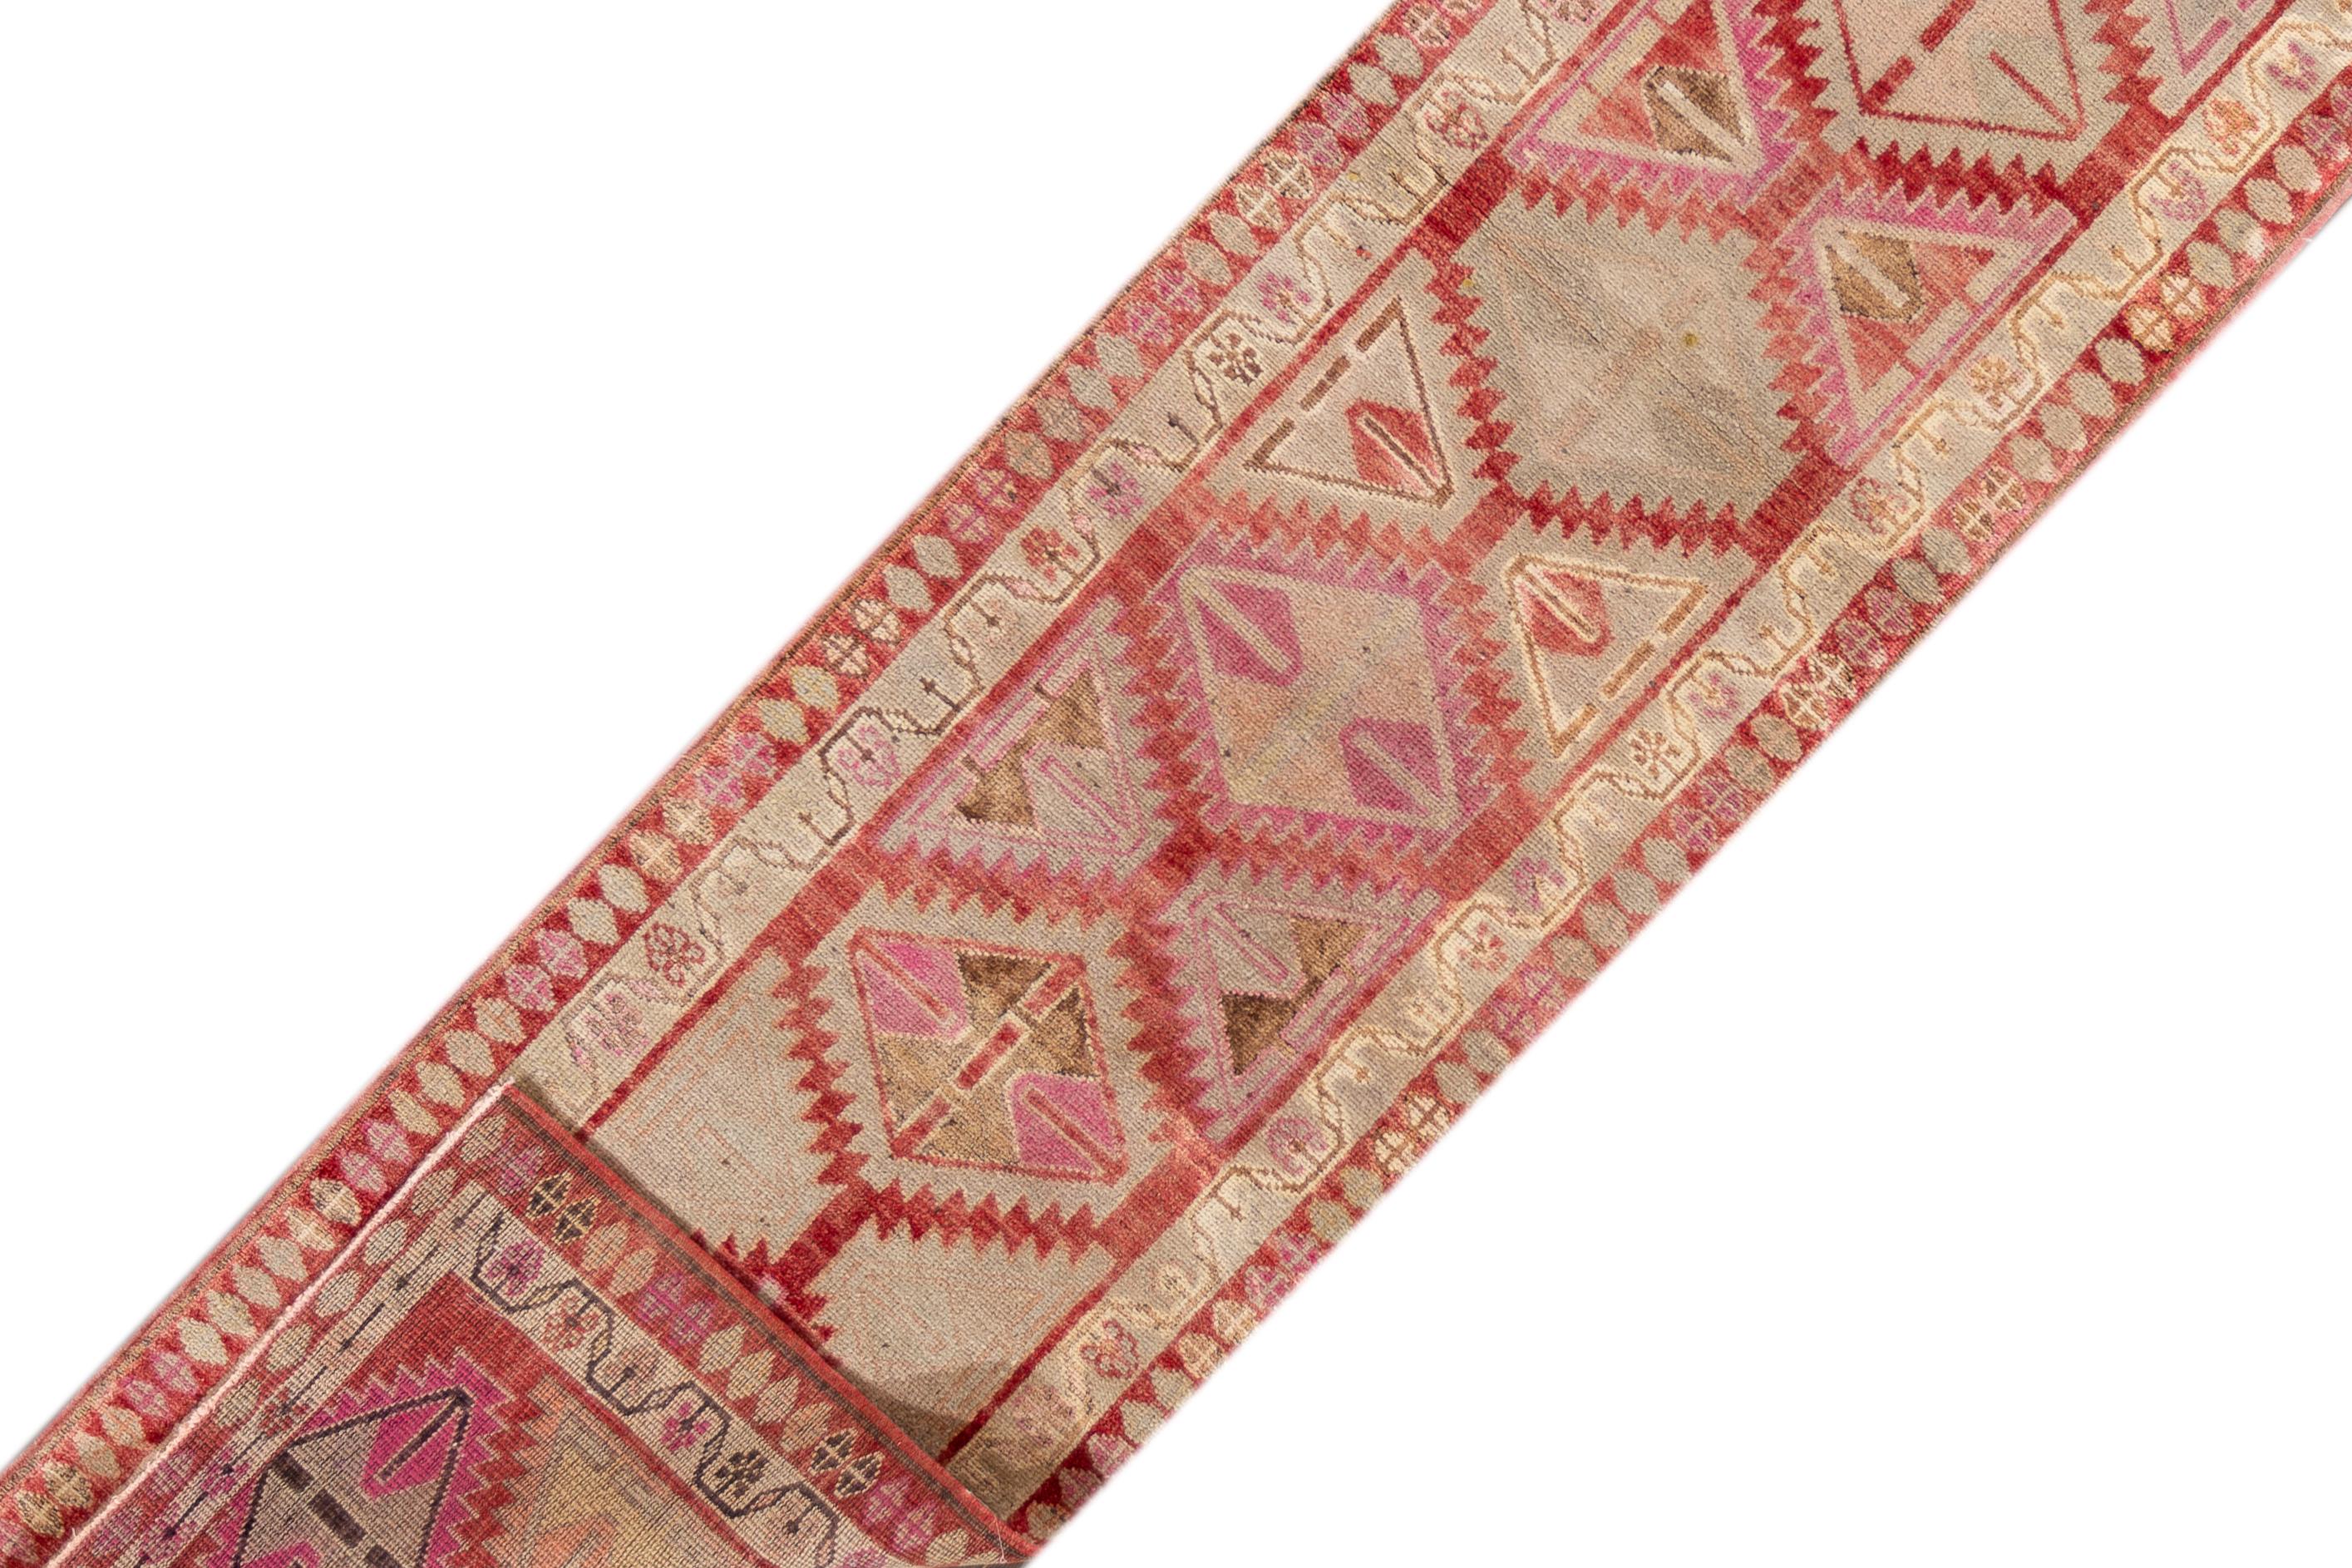 A 20th century vintage Turkish Anatolian runner rug with an all over geometric motif. This rug measures at 2'9